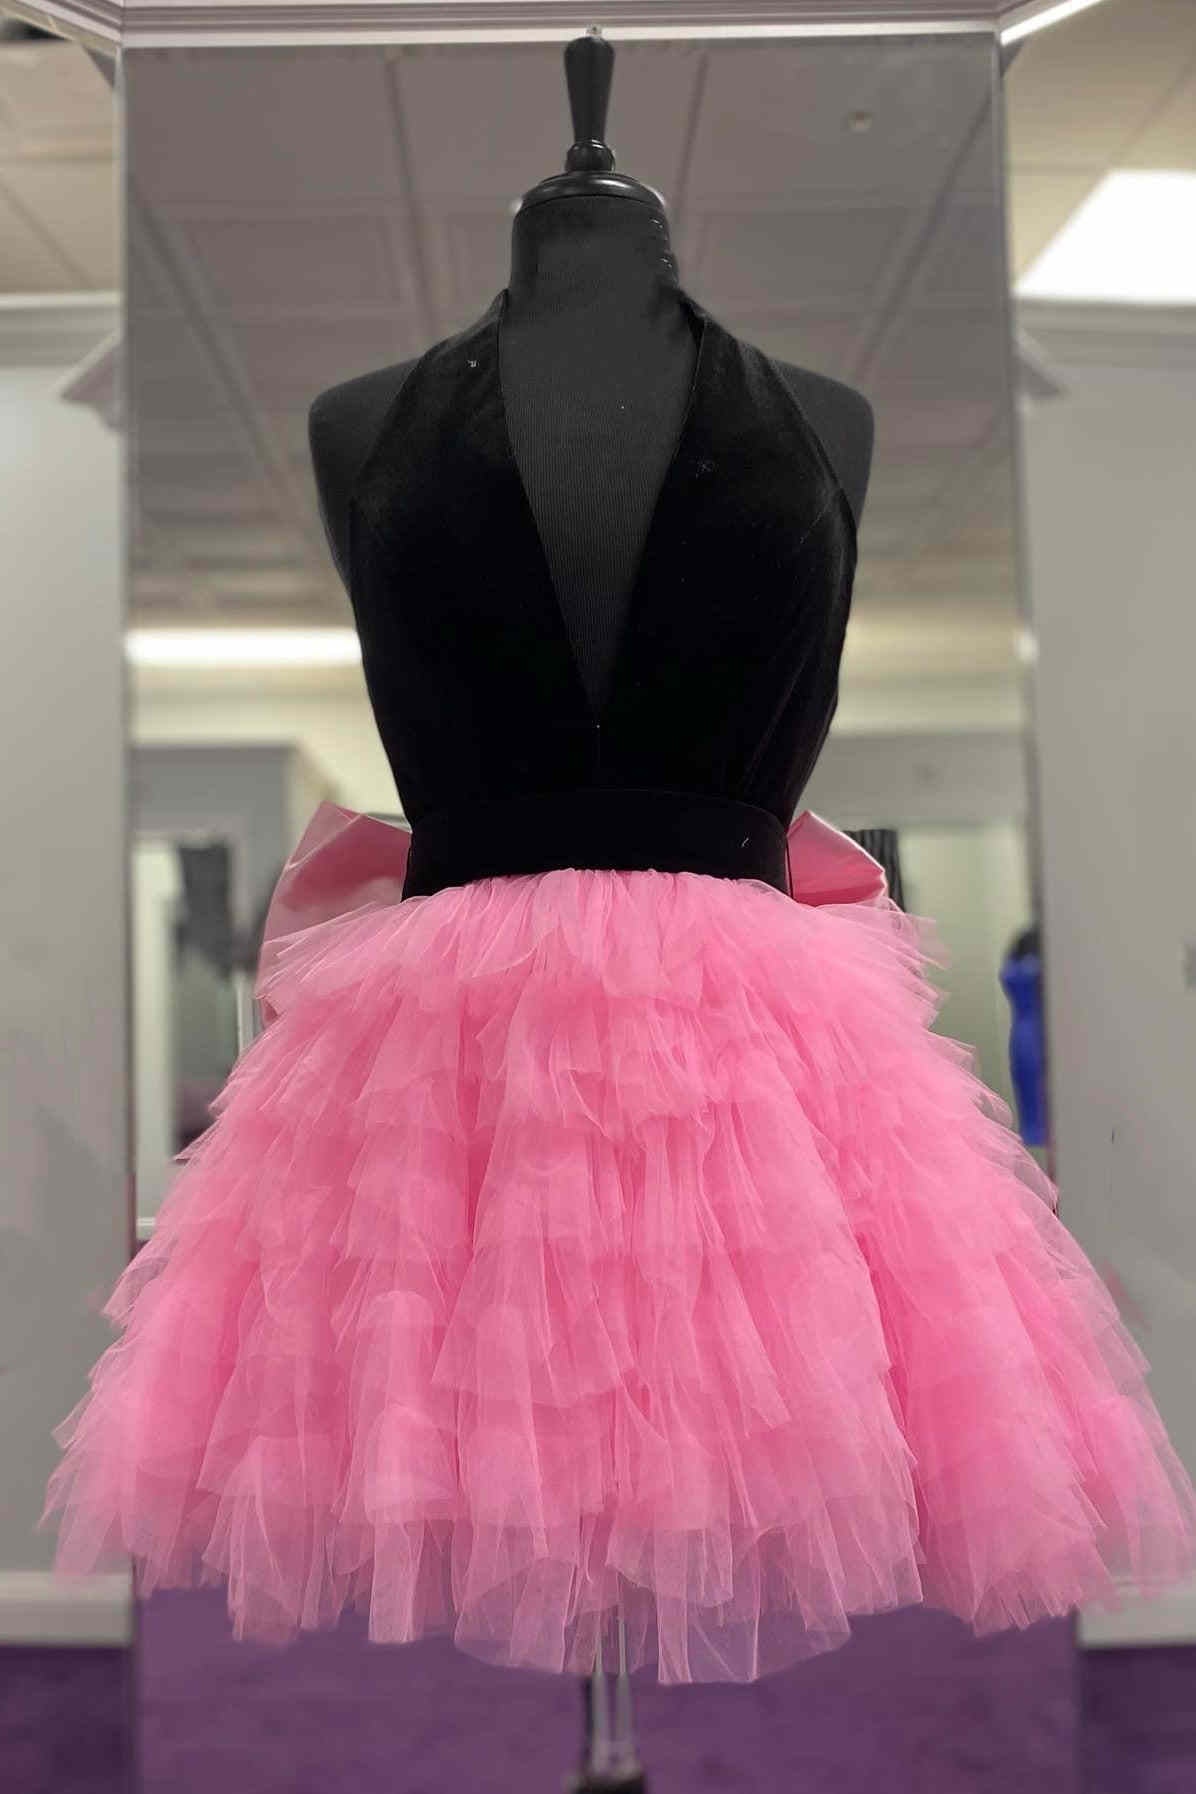 Cute Black and Pink Halter Ruffle Short Party Dress